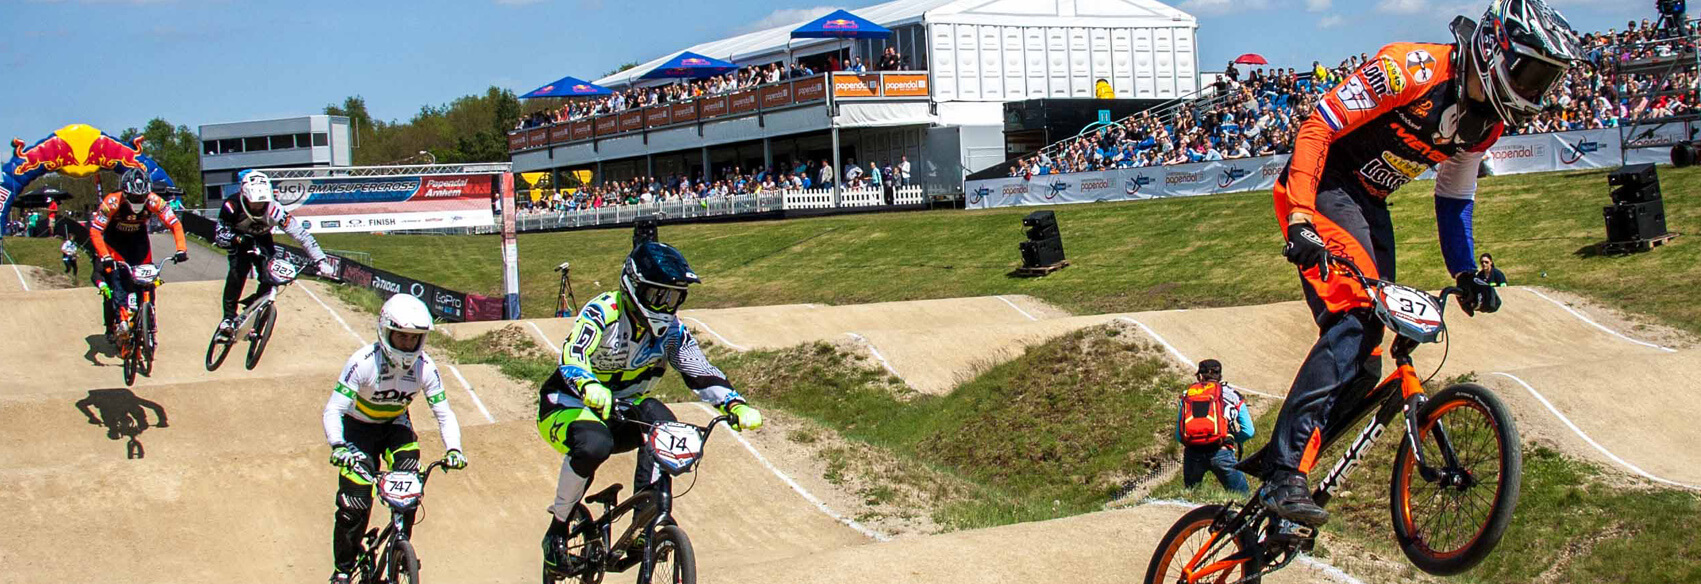 2017 UCI SX World Cup Papendal - Papendal